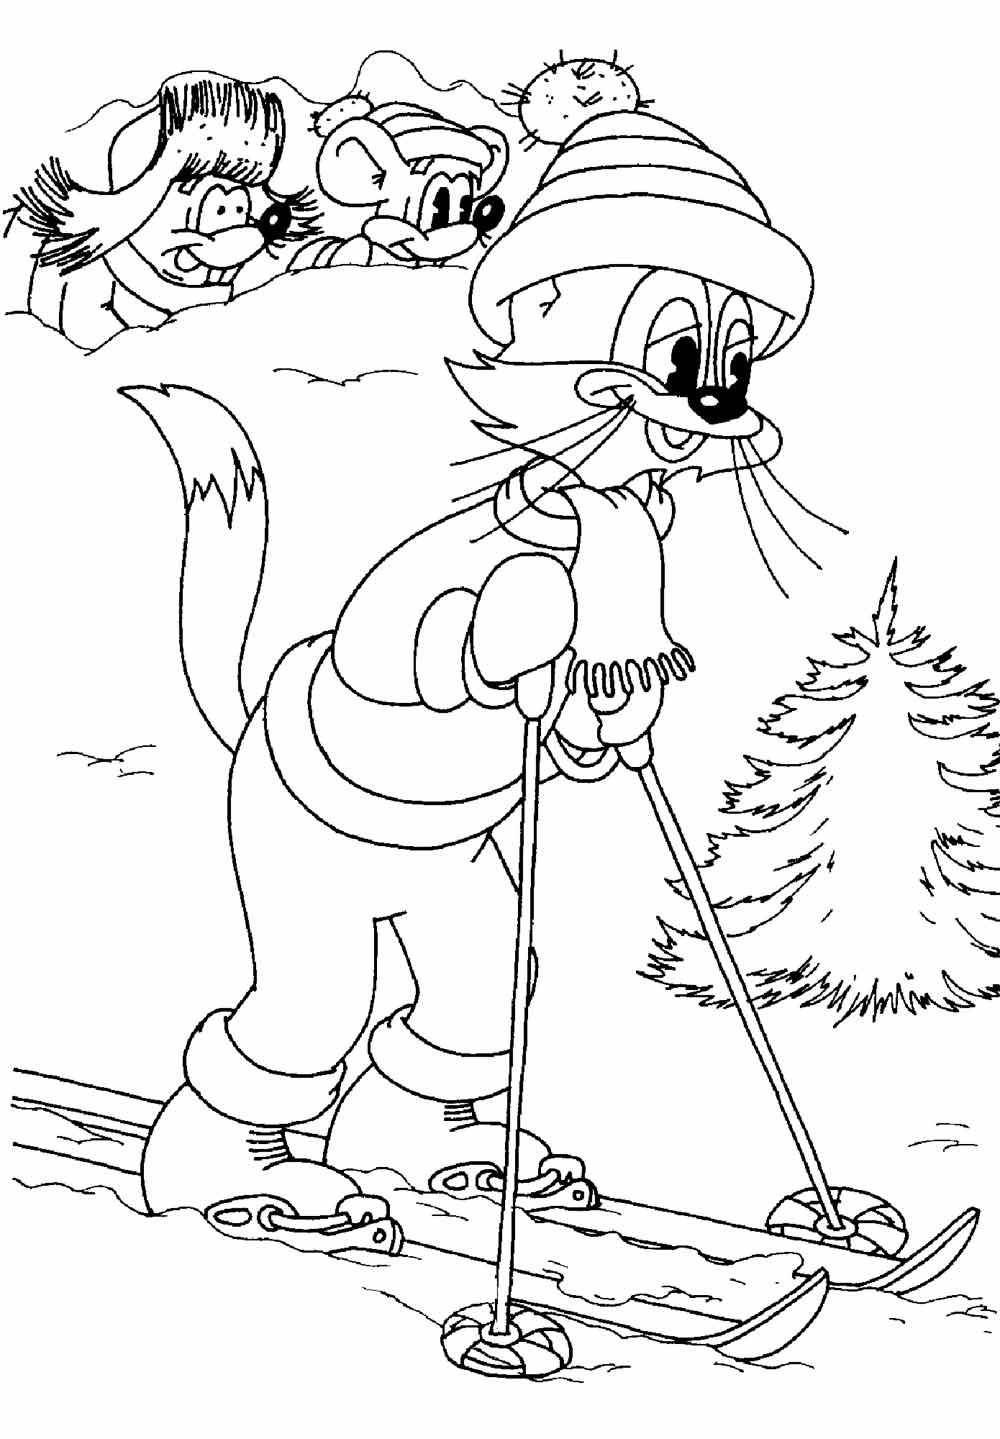 Coloring Figure Leopold the cat on skis. Category Pets allowed. Tags:  cat, cat.